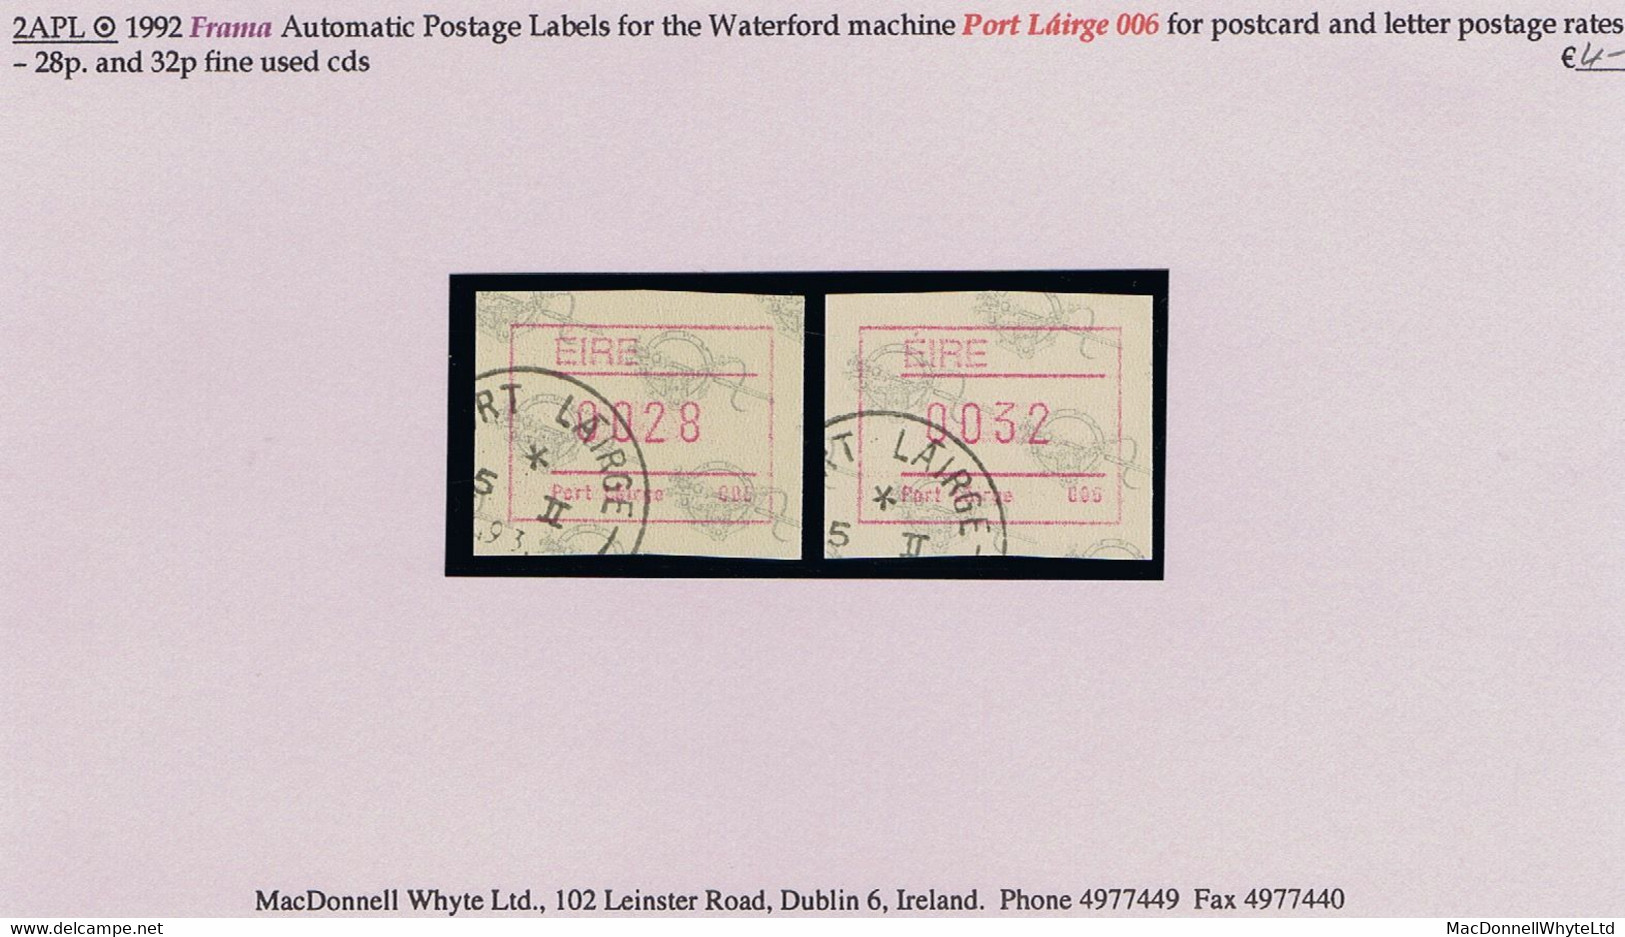 Ireland 1992 Frama Automatic Postage Labels For Waterford 006 Machine 28p Postcard Rate And 32p Letter Rate Fine Used - Frankeervignetten (Frama)